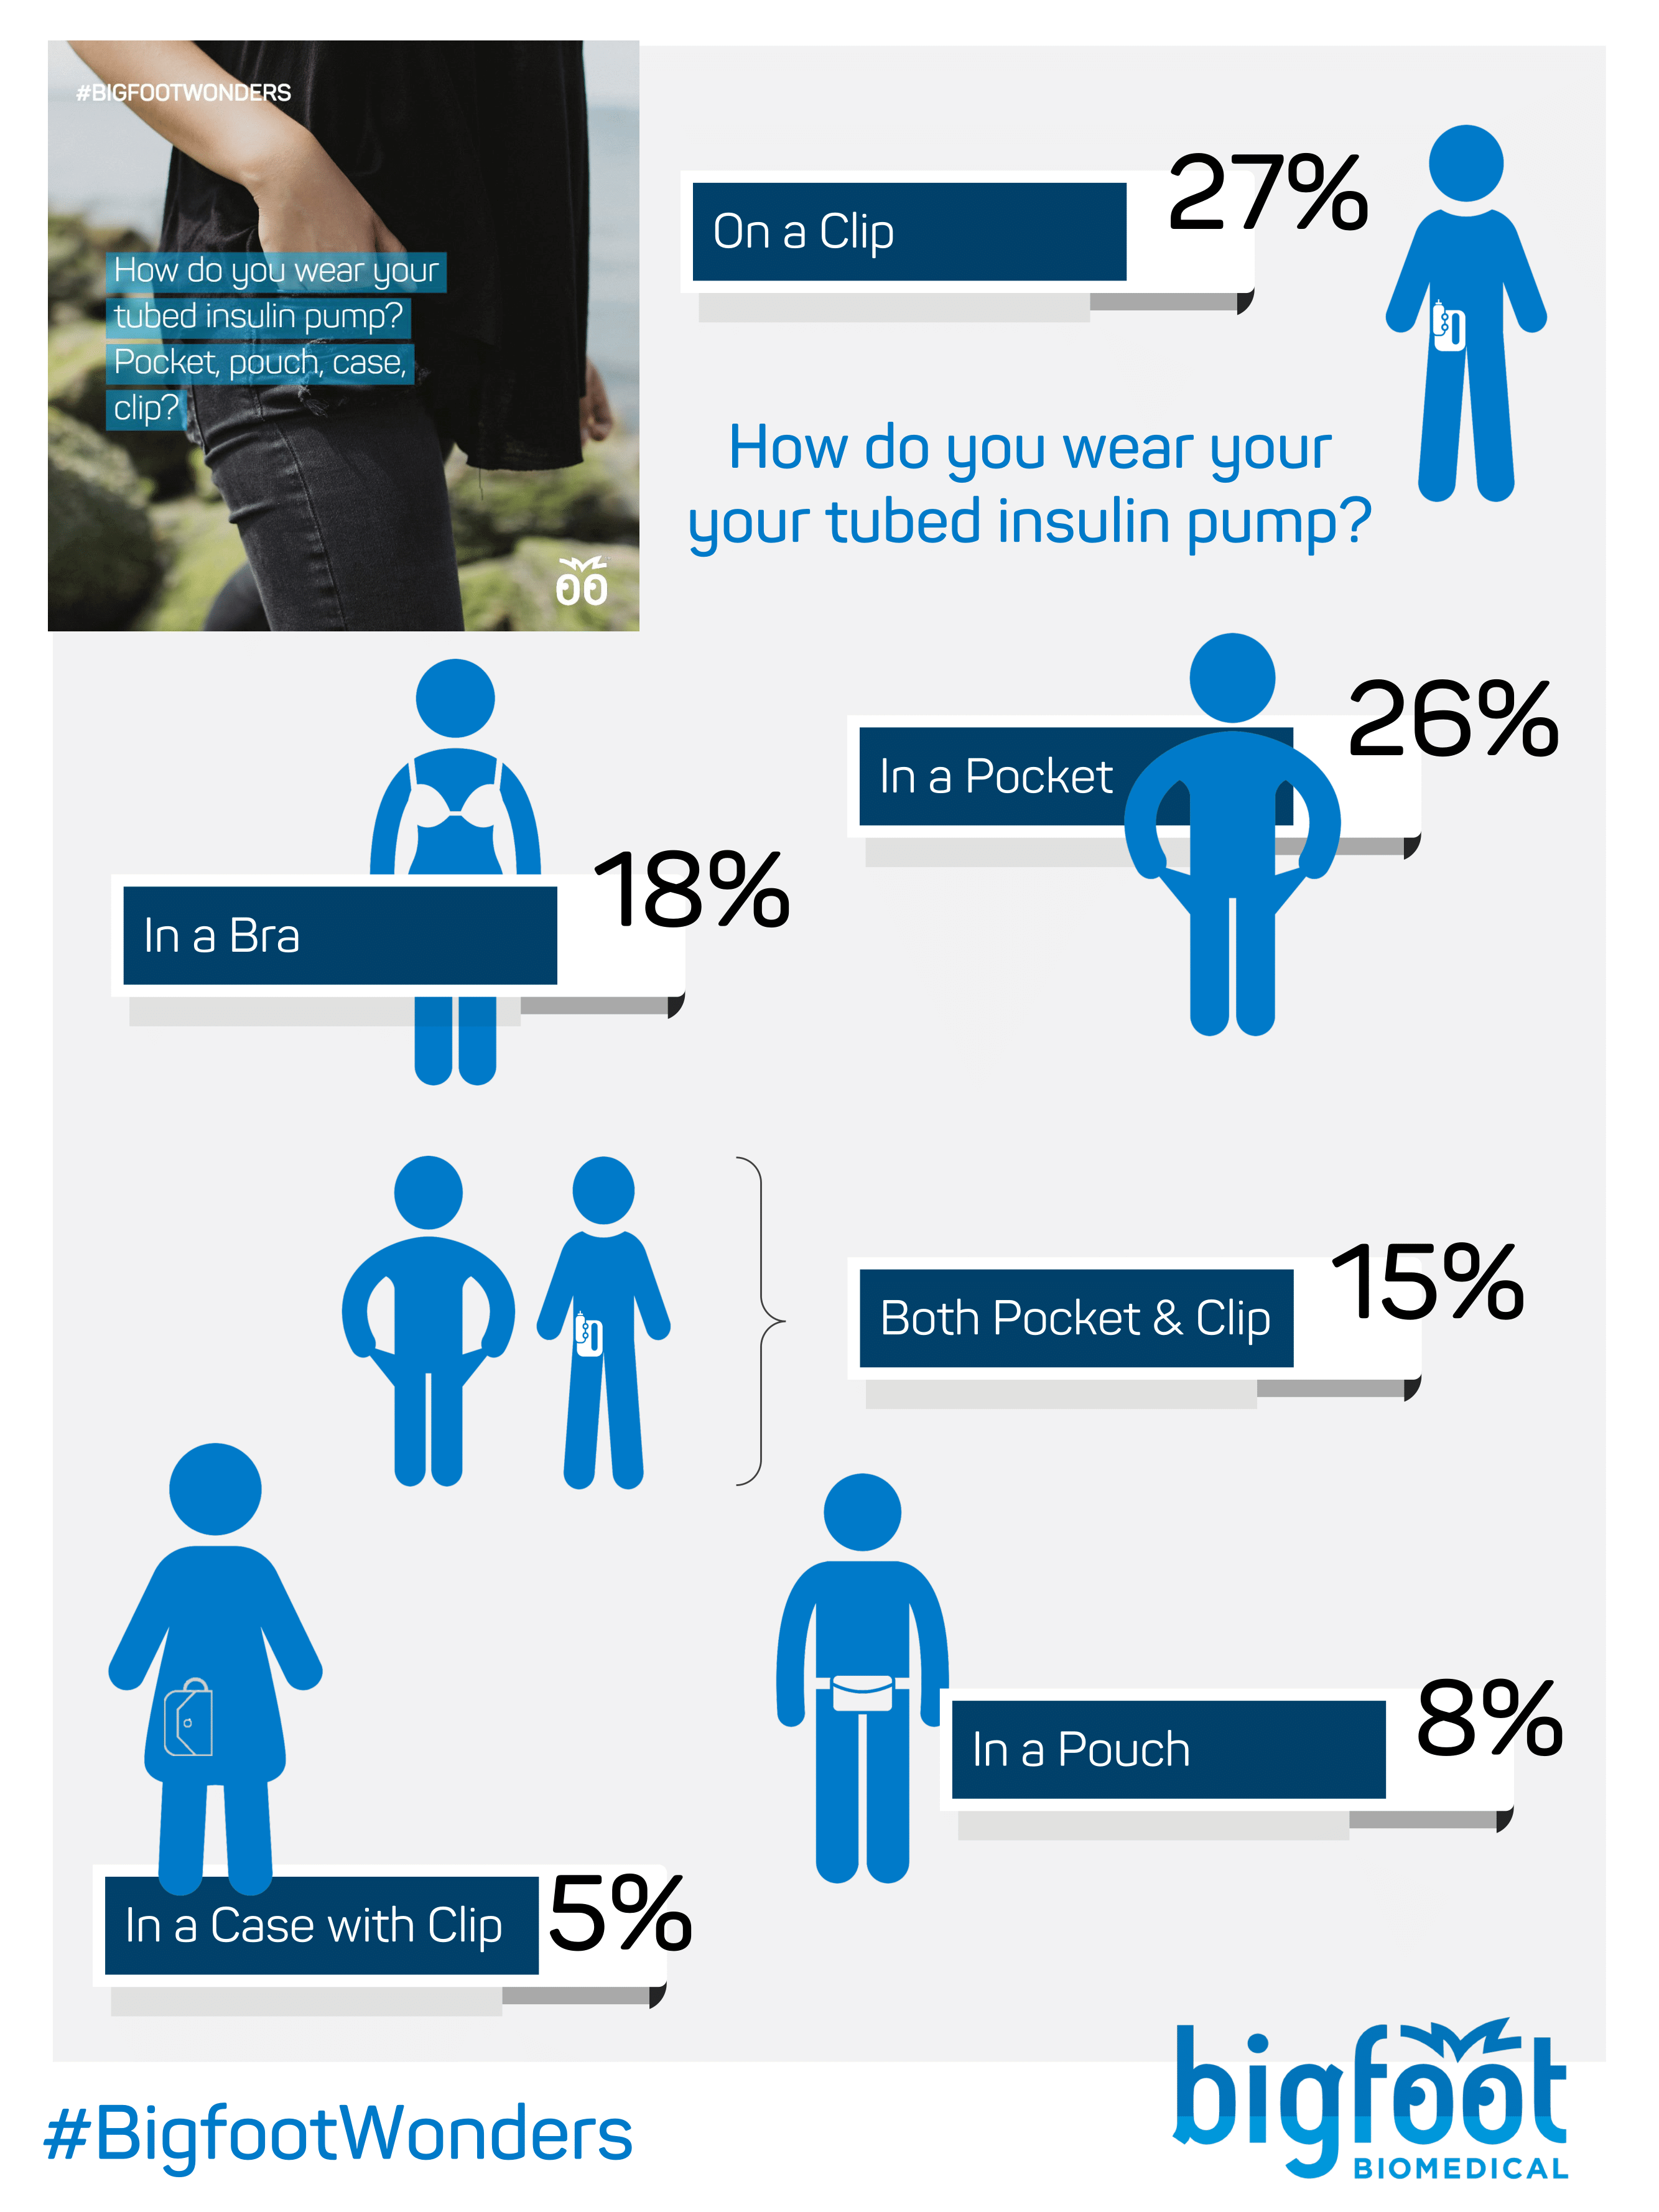 How do you wear your tubed insulin pump? 27% of people said clip, 26% said pocket, 15% said combination of pocket and clip, 18% said bra, 8% said pouch, 5% said case.